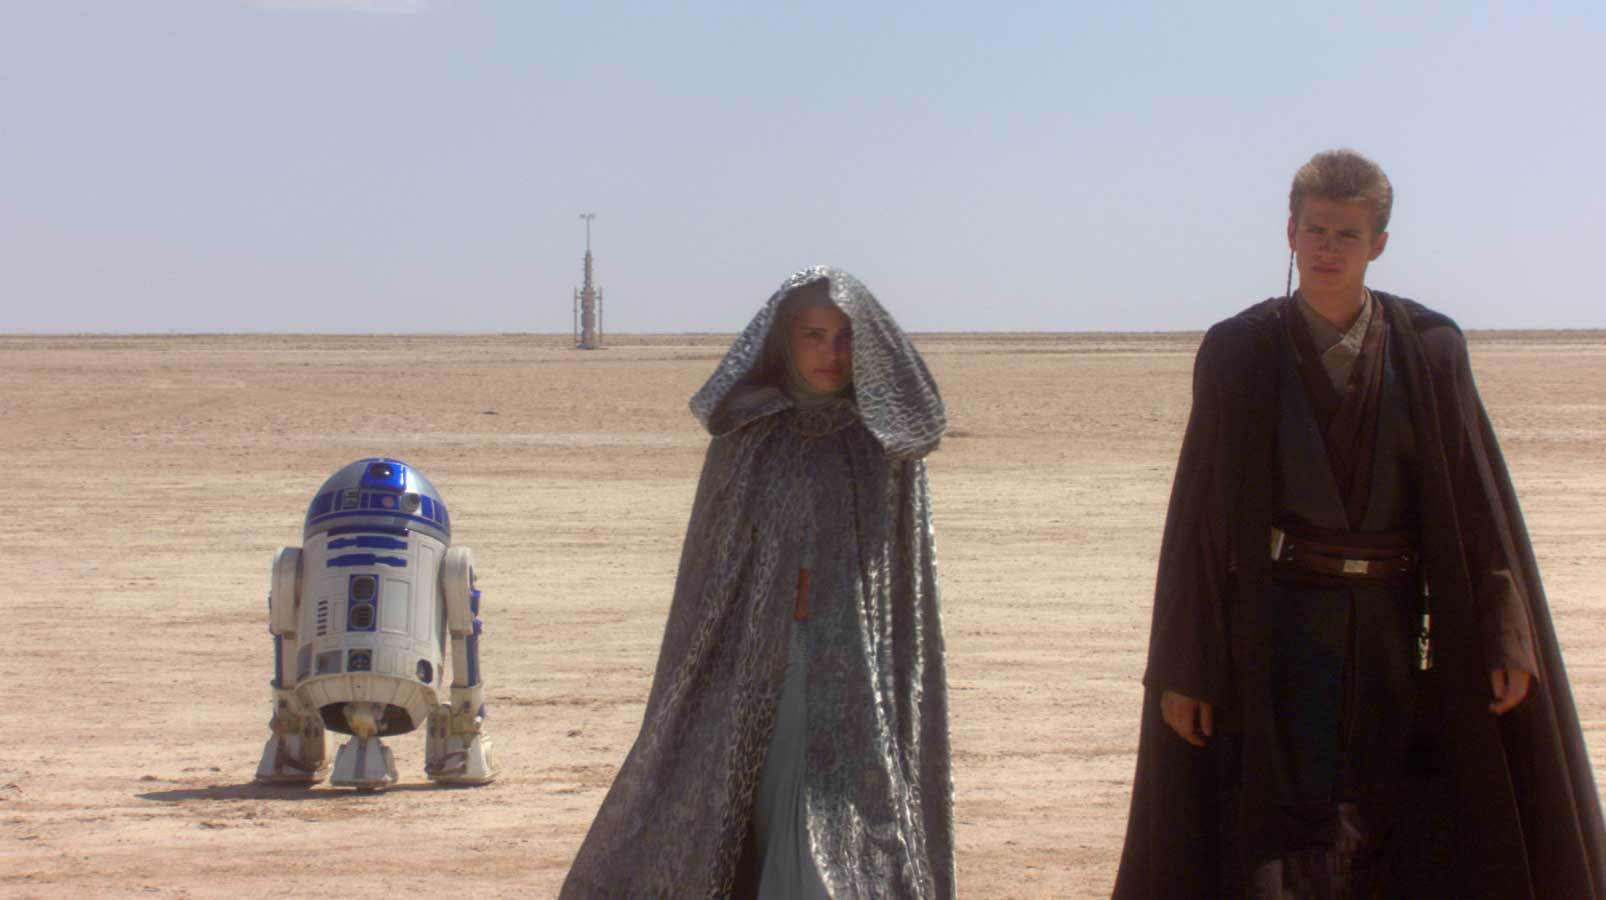 Artoo accompanied Anakin and Padmé to Naboo, but Anakin's fears for his mother led him back to Ta...